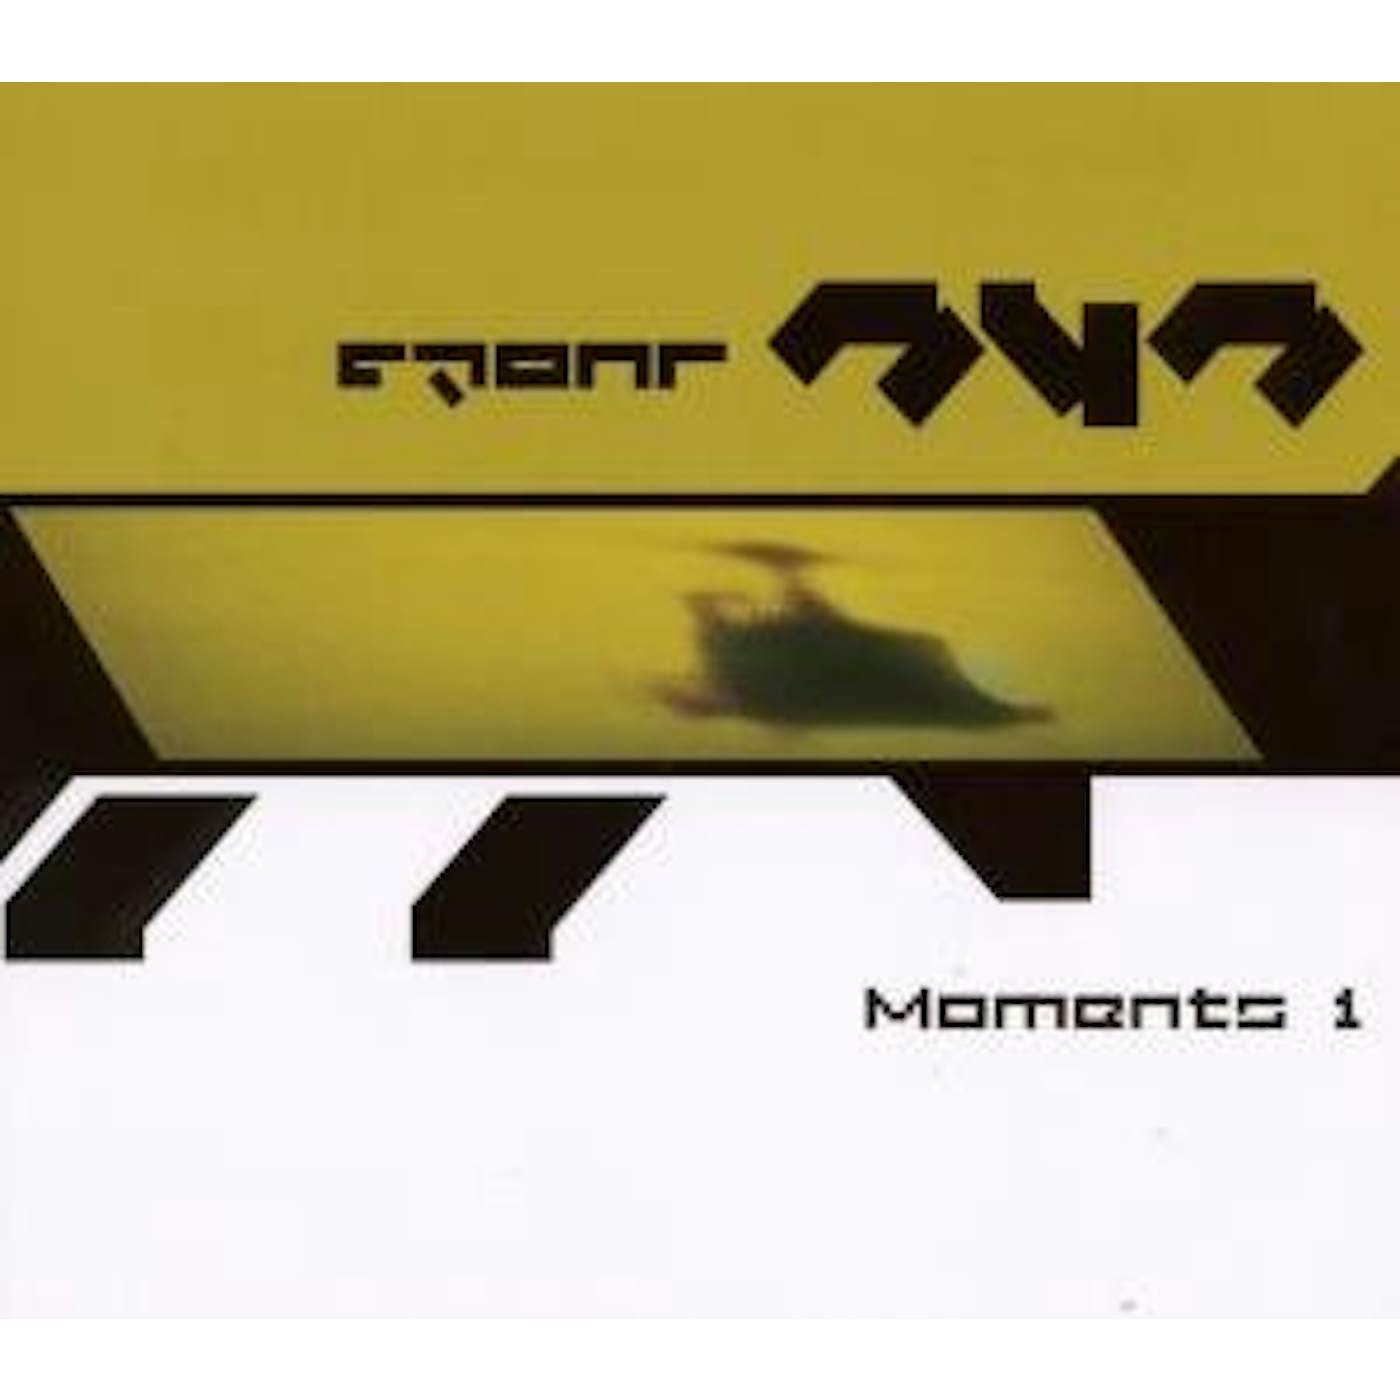 Front 242 MOMENTS CD